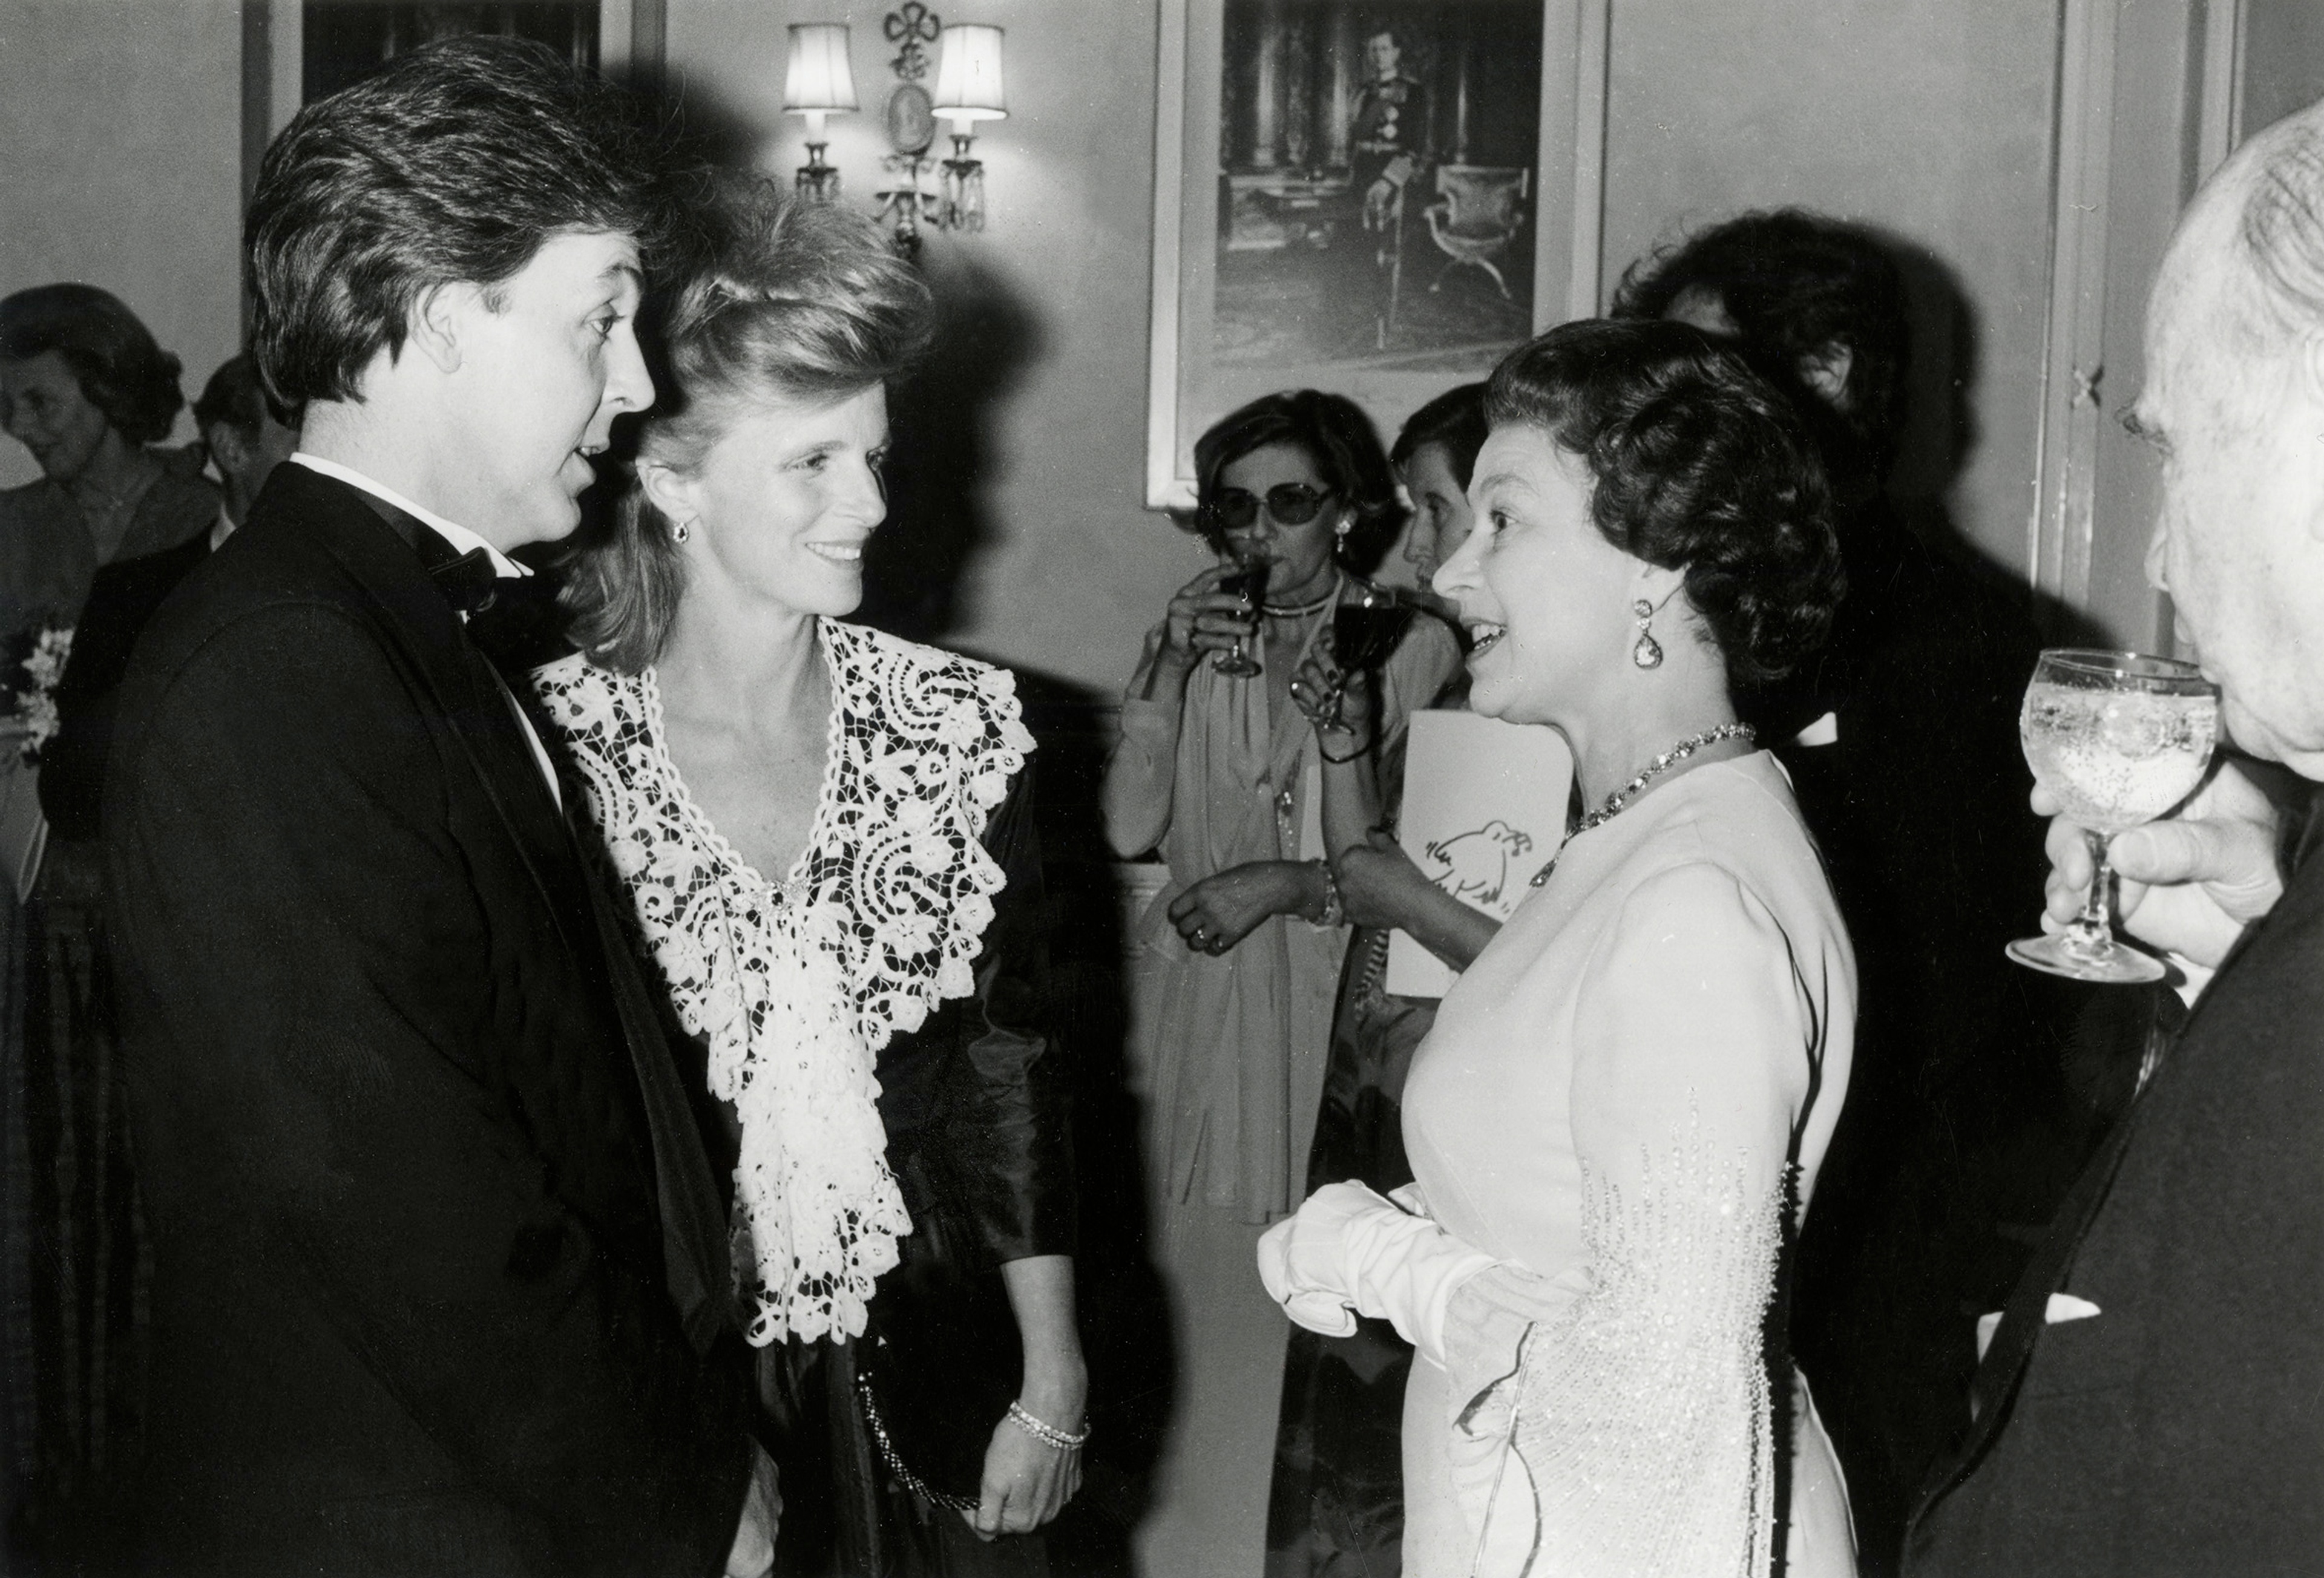 Paul and Linda with HRH Queen Elizabeth at an 'Evening for Conservation', at the Royal Albert Hall 